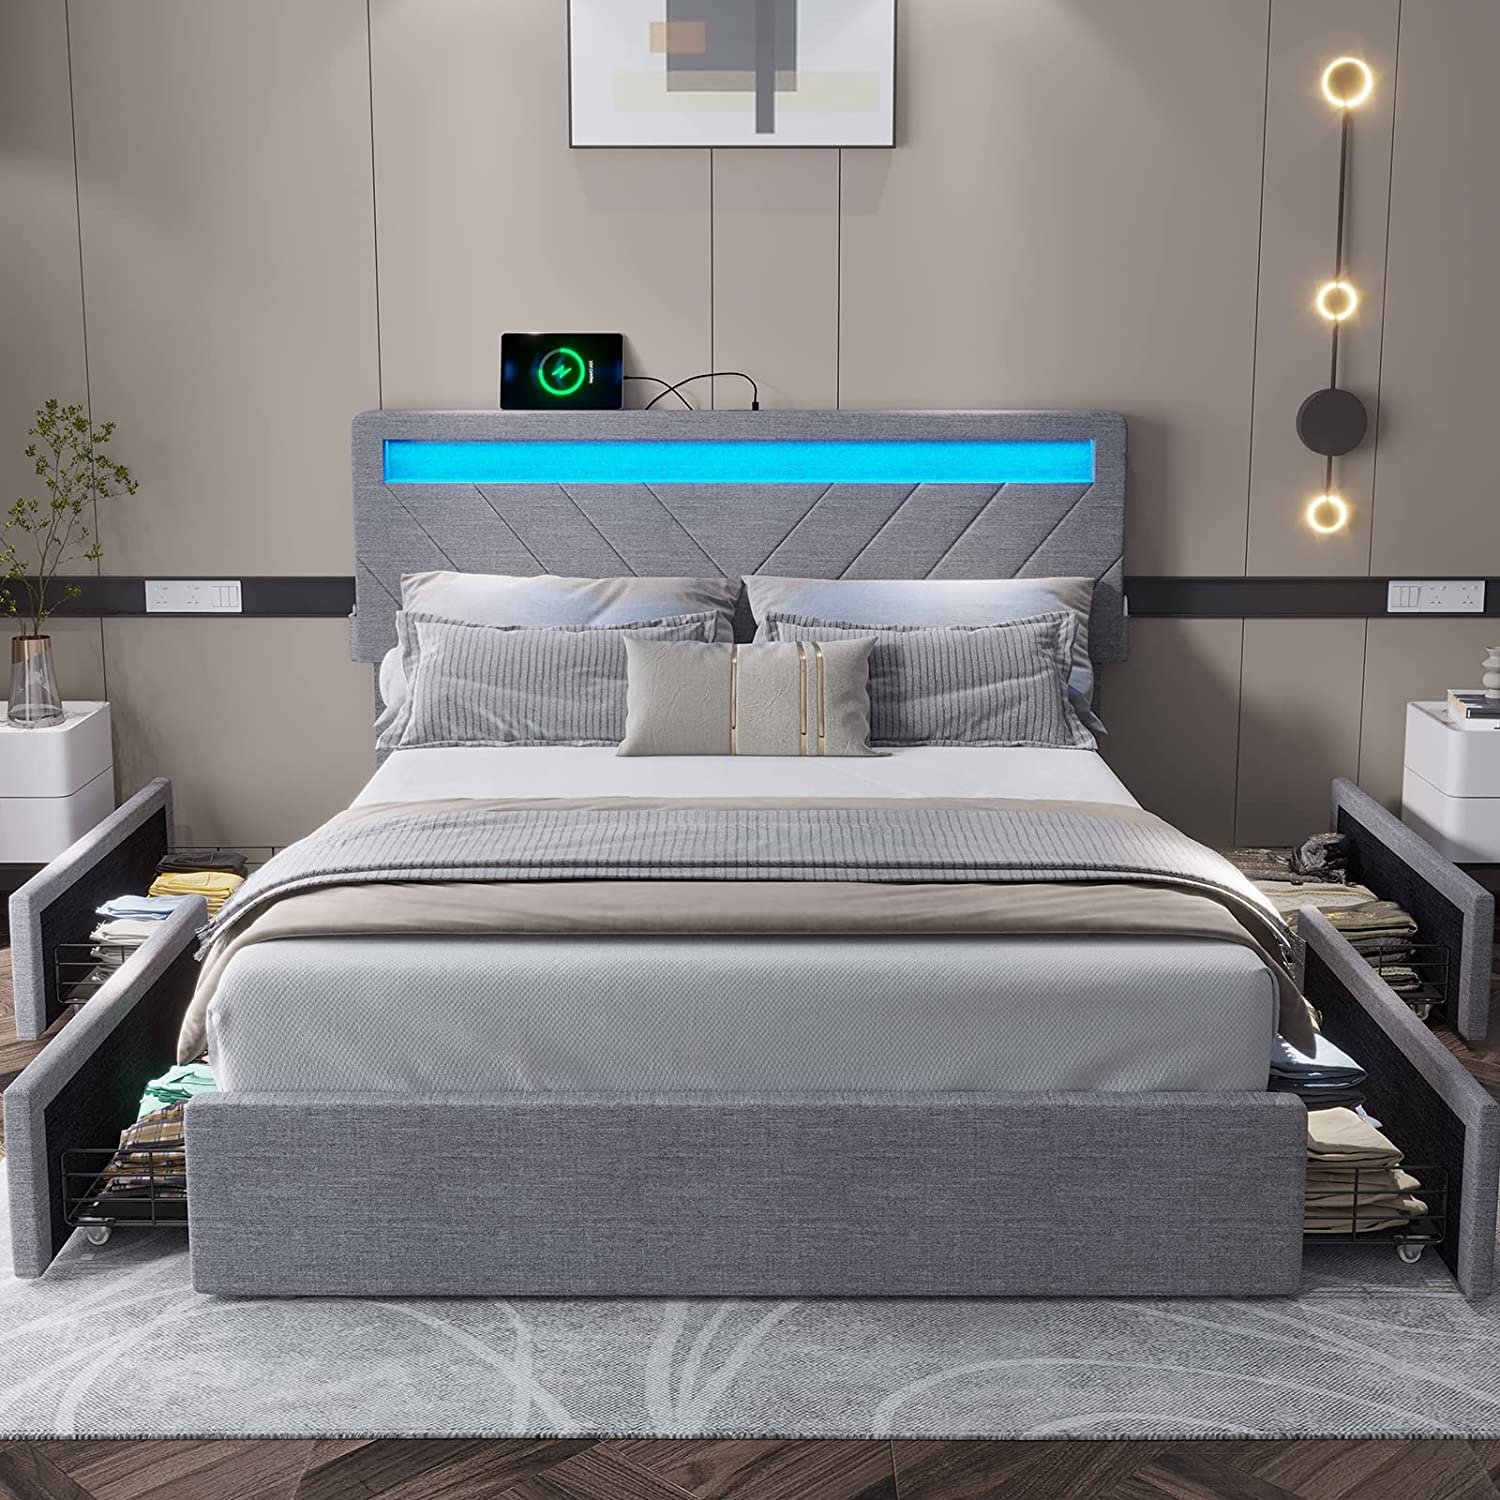 ADORNEVE Queen Size LED Bed Frame with Drawers, Upholstered Platform Bed with 2 USB Charging Station, No Box Spring Needed, Light Grey - image 5 of 8